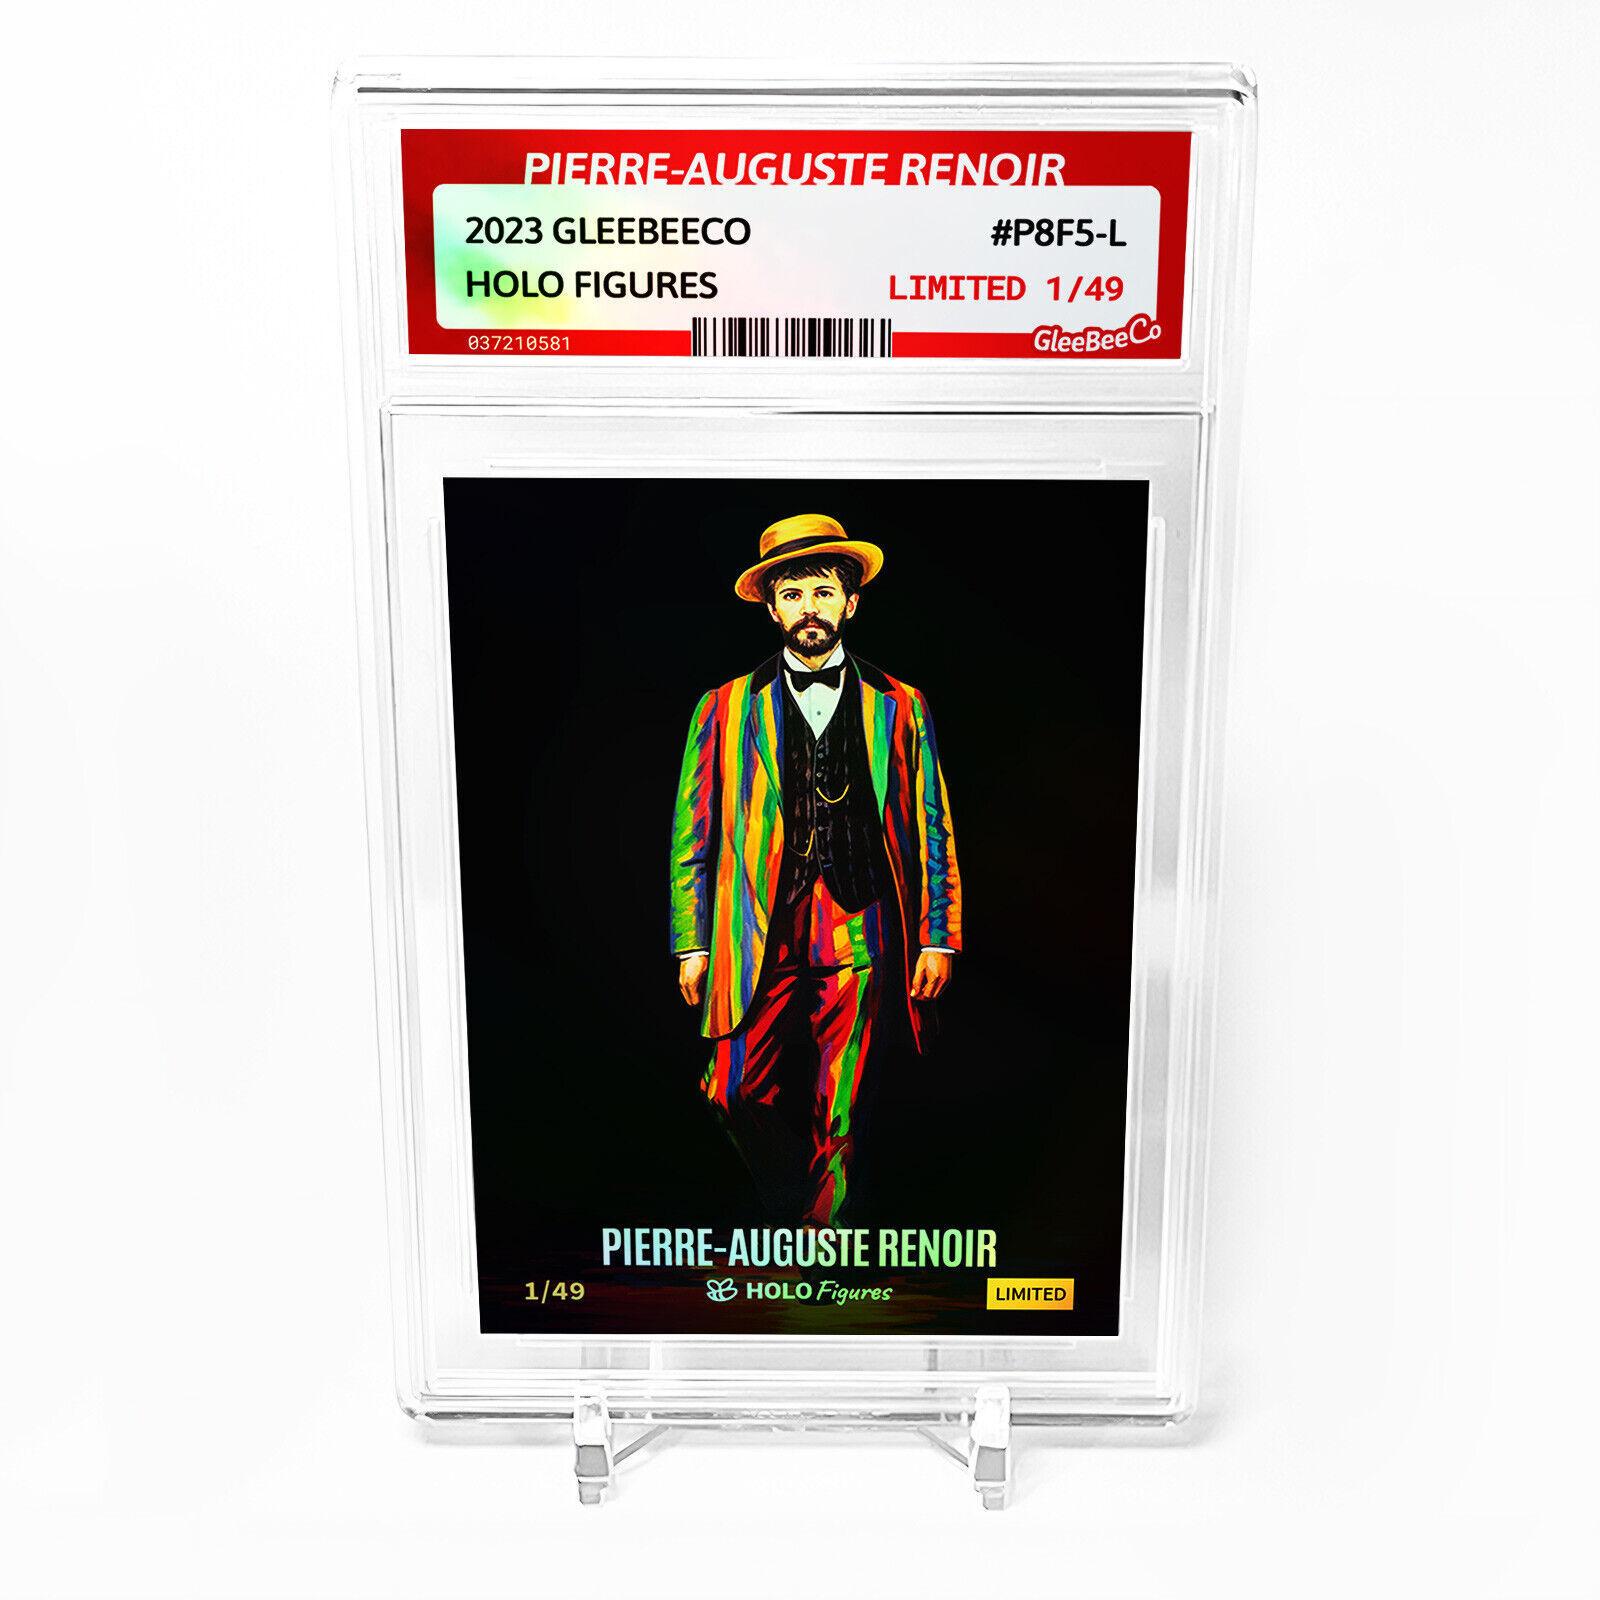 PIERRE-AUGUSTE RENOIR Card GleeBeeCo Holo Figures #P8F5-L Limited to Only /49